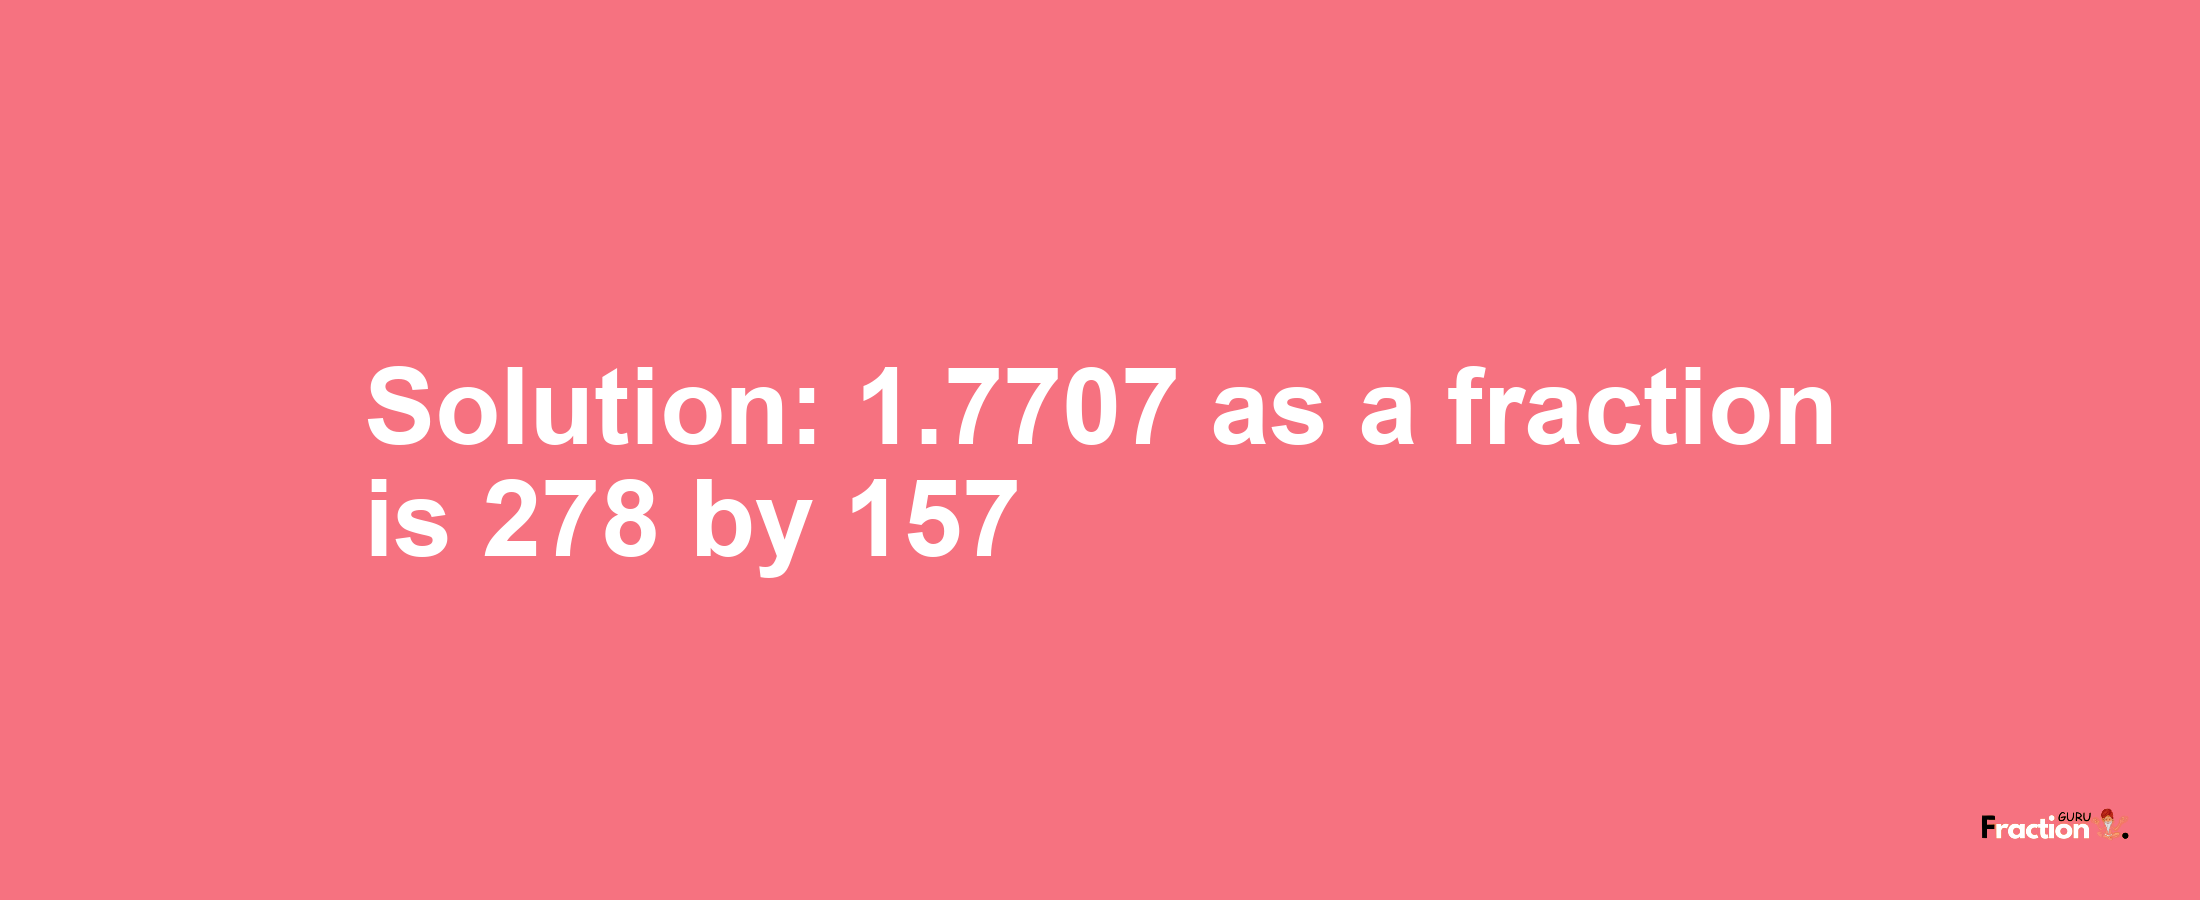 Solution:1.7707 as a fraction is 278/157